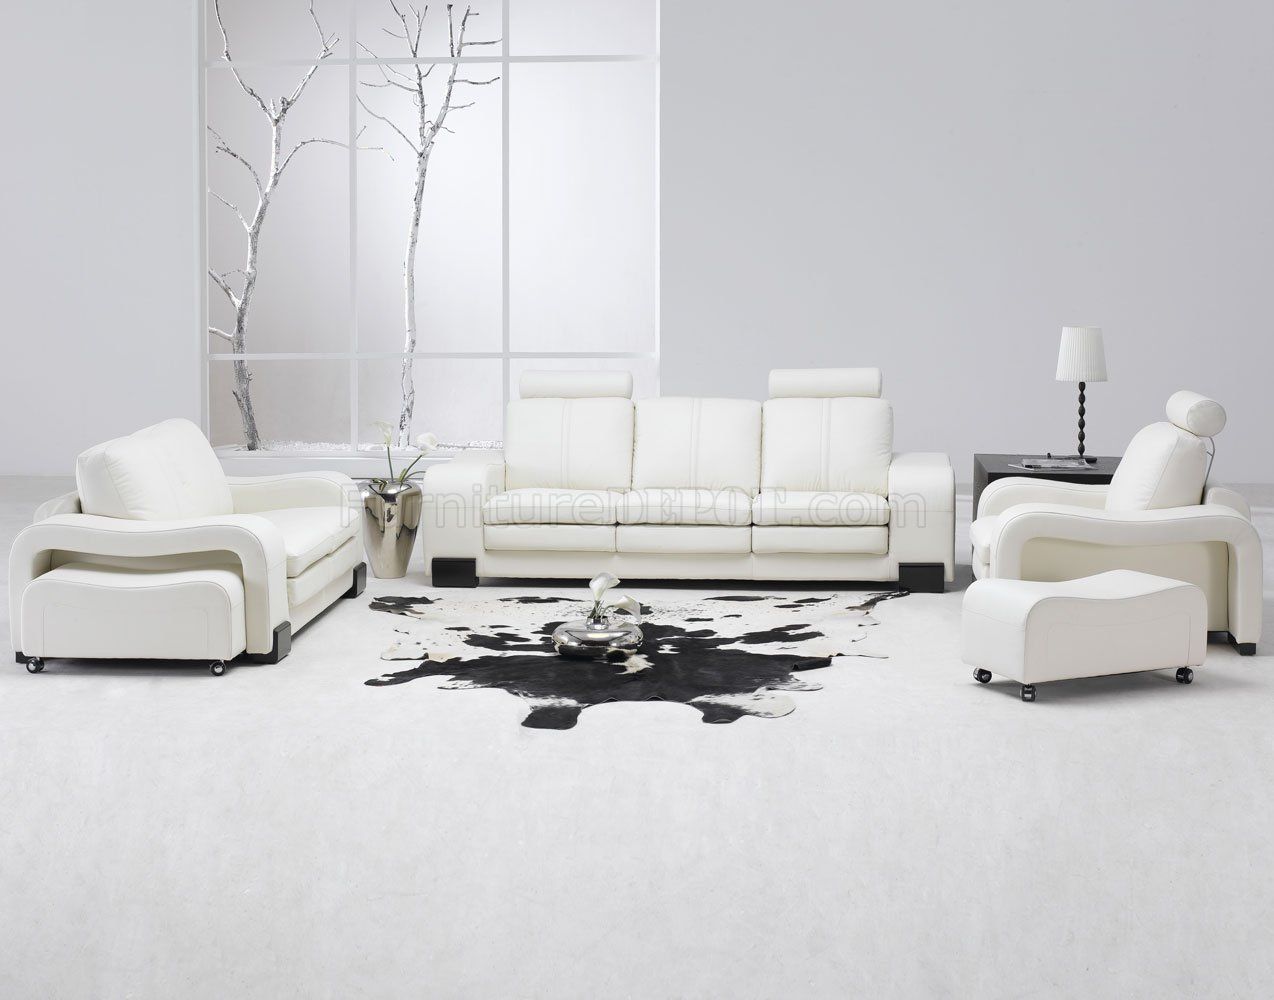 White Leather 4pc Modern Sofa, Loveseat, Chair & Couch Inside 4pc Beckett Contemporary Sectional Sofas And Ottoman Sets (View 9 of 15)